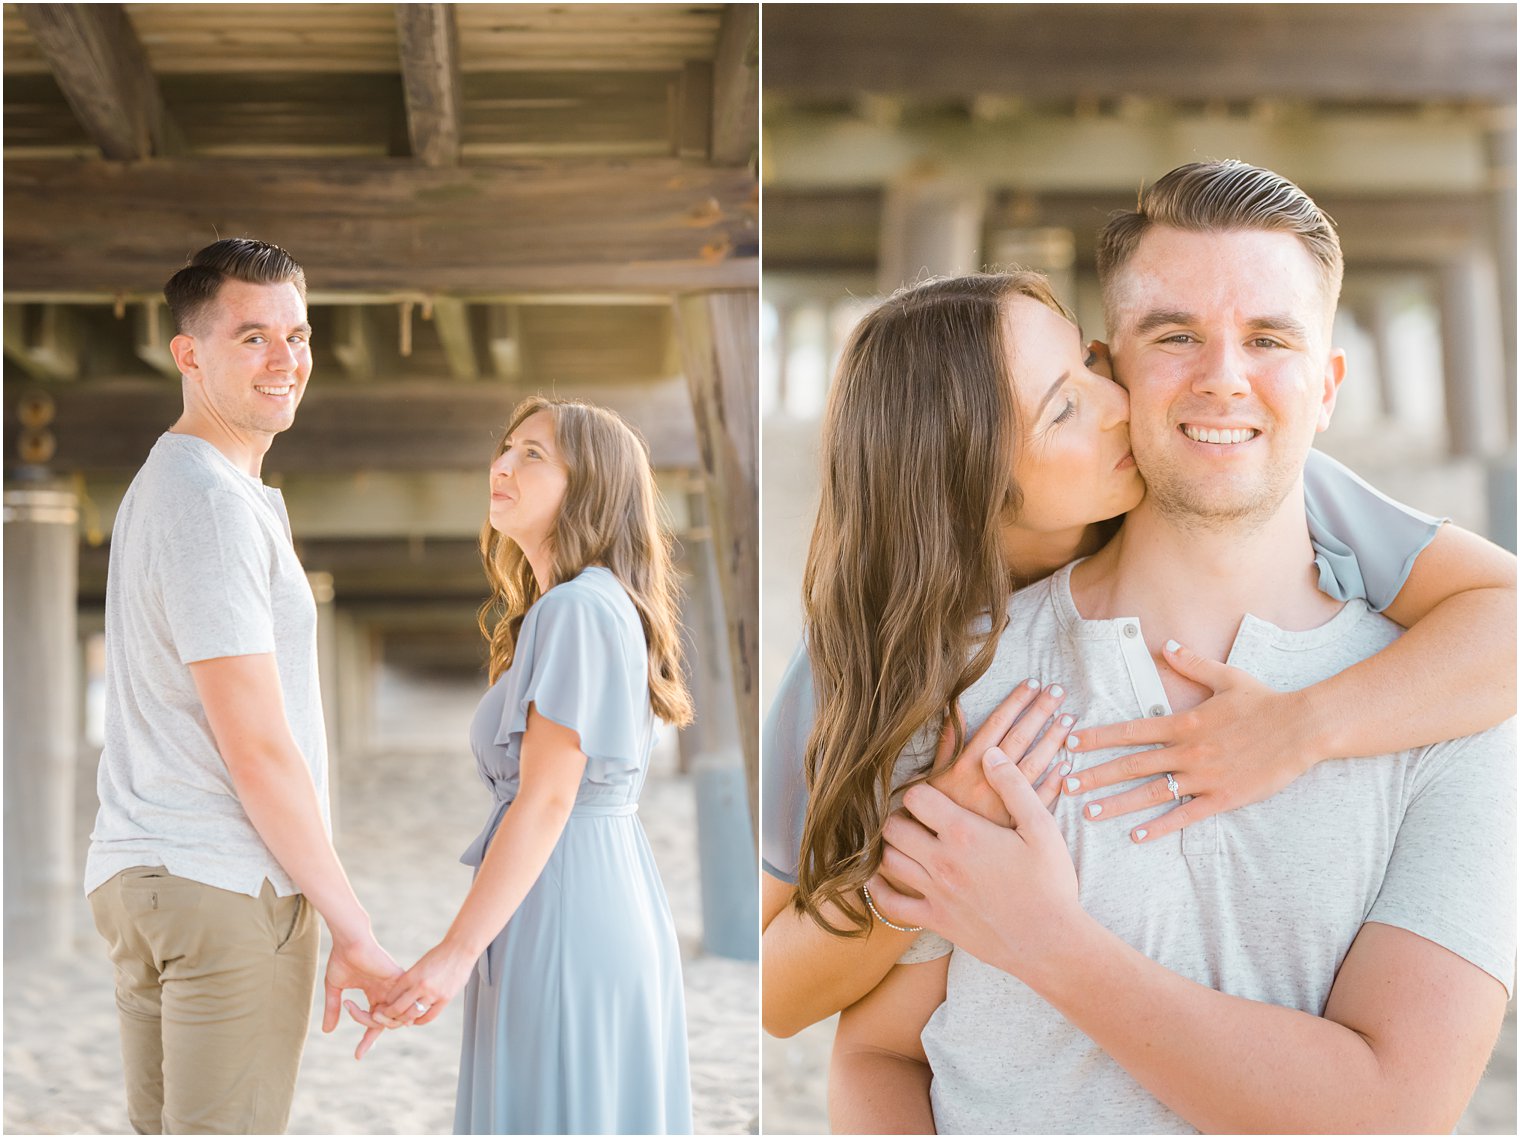 New Jersey engagement photos under 9th Ave Pier